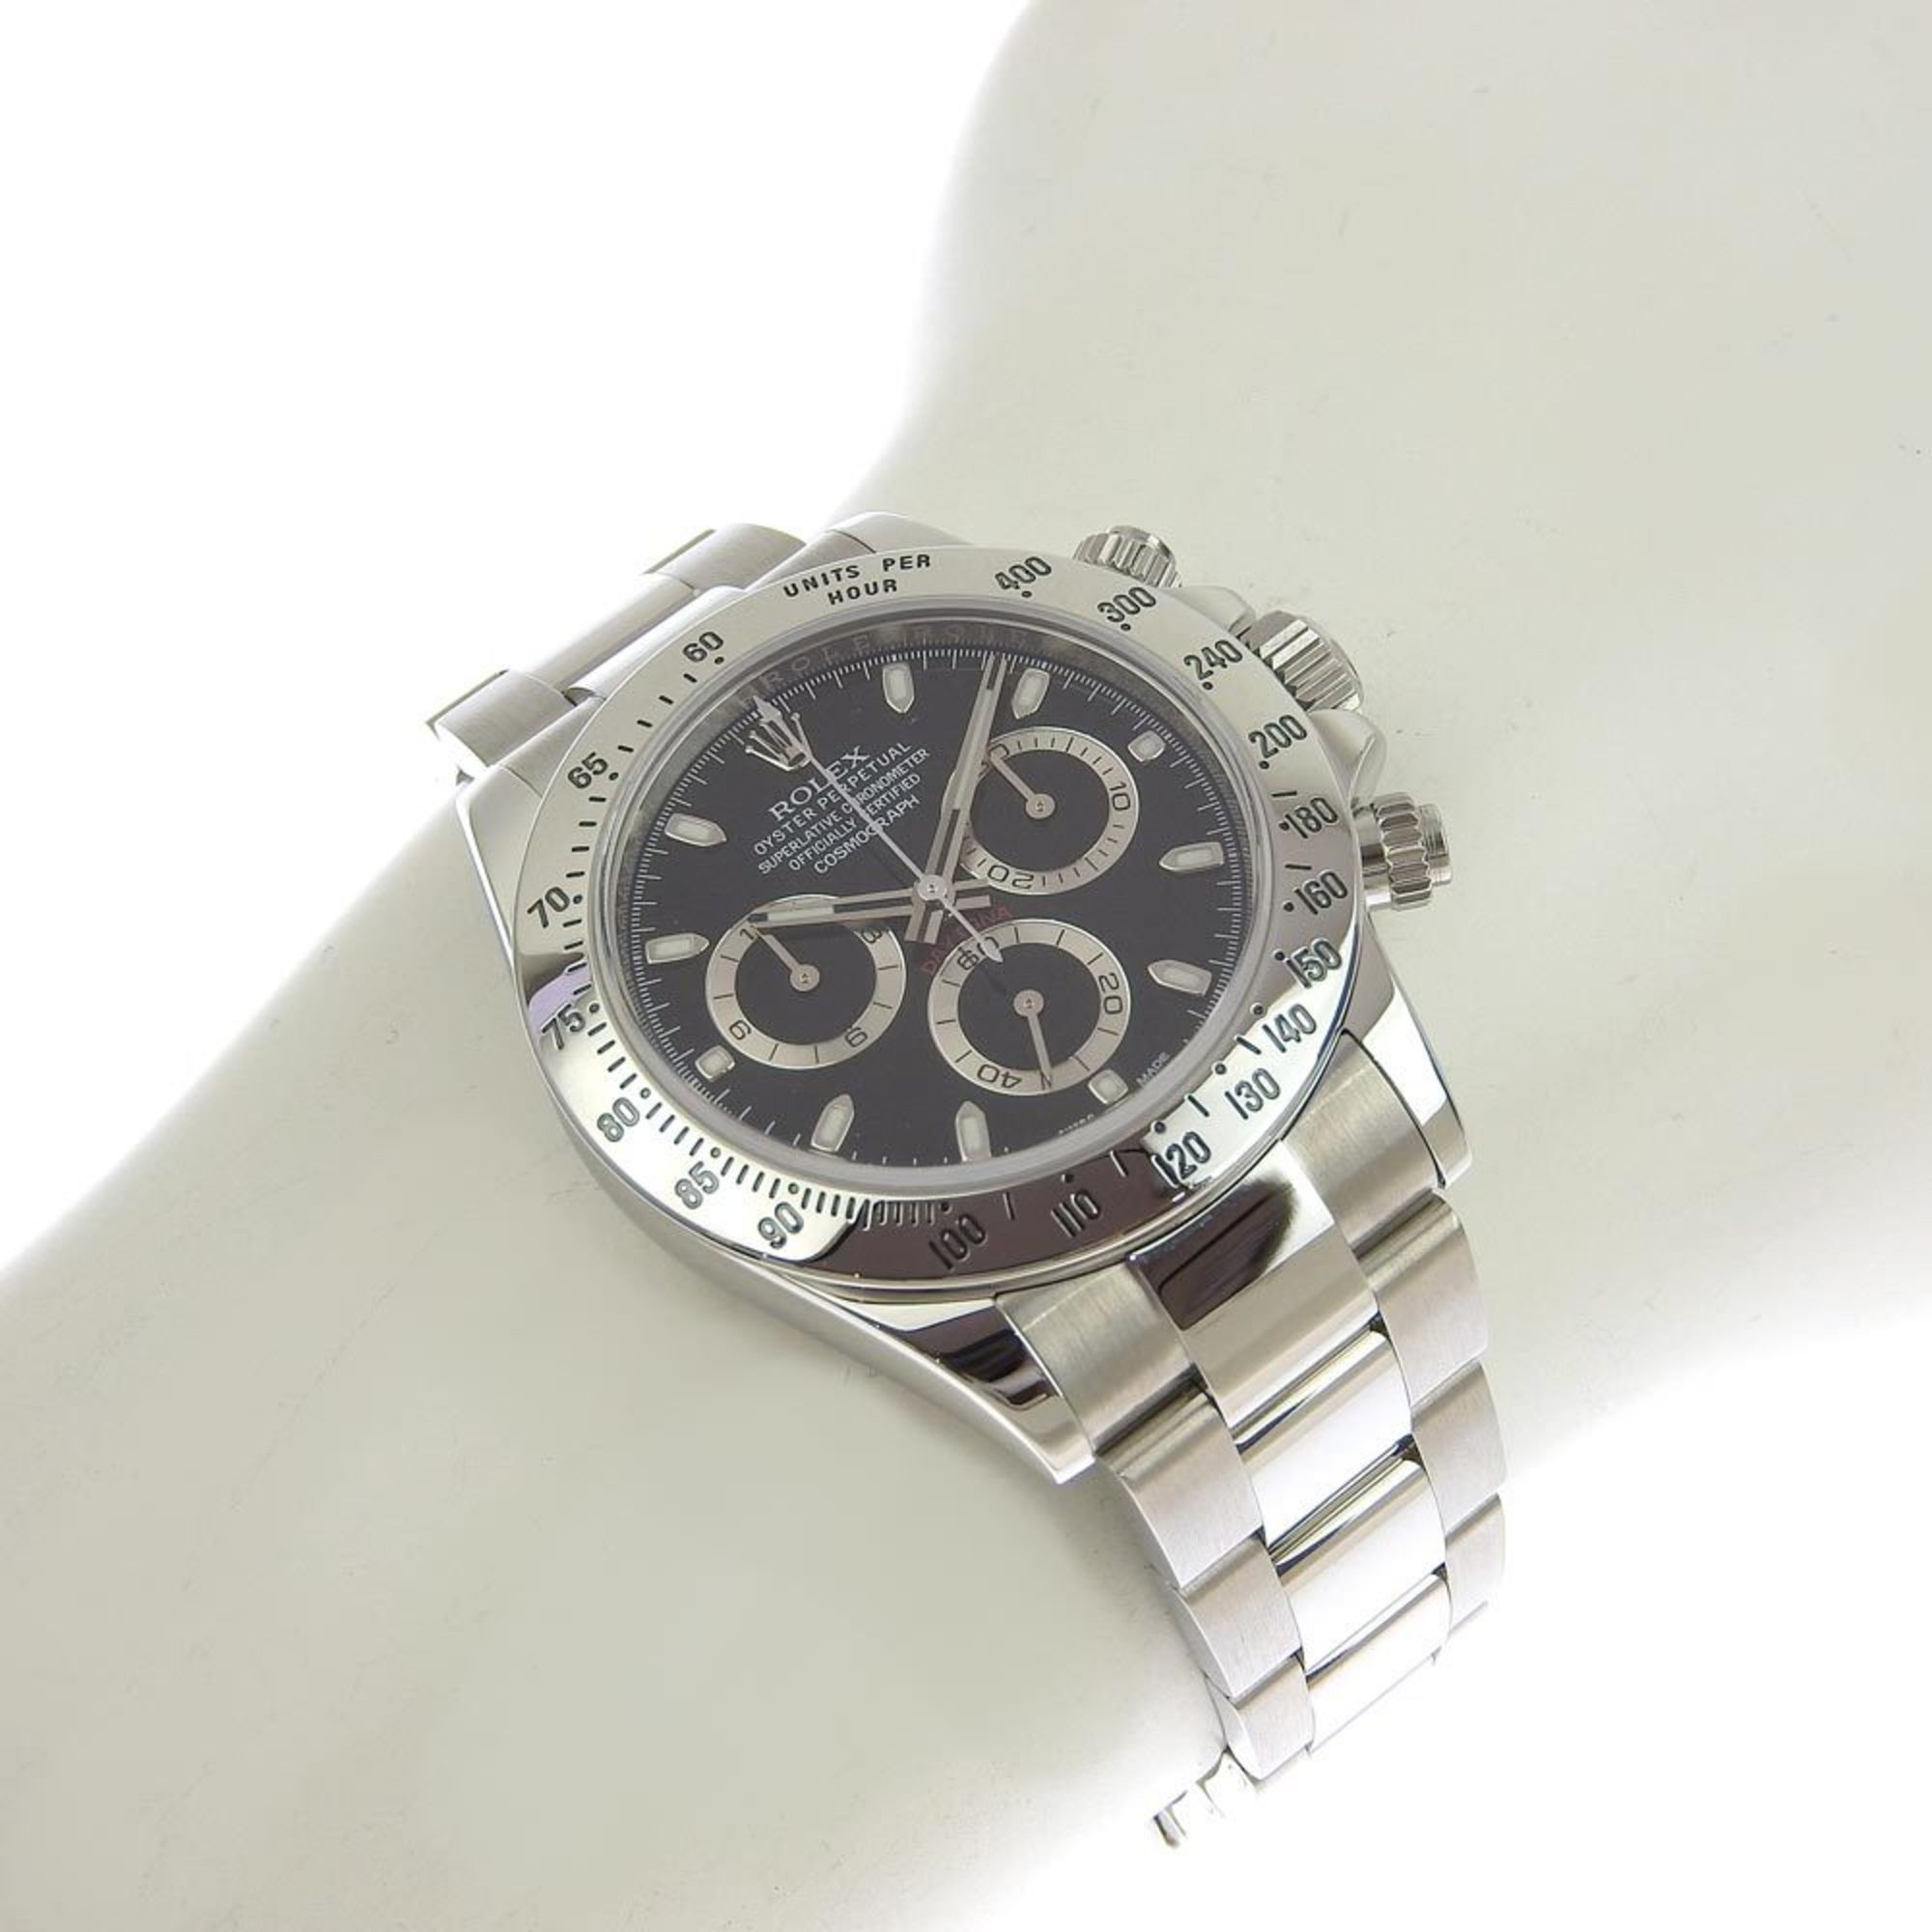 Rolex Automatic Stainless Steel Men's Watch 116520